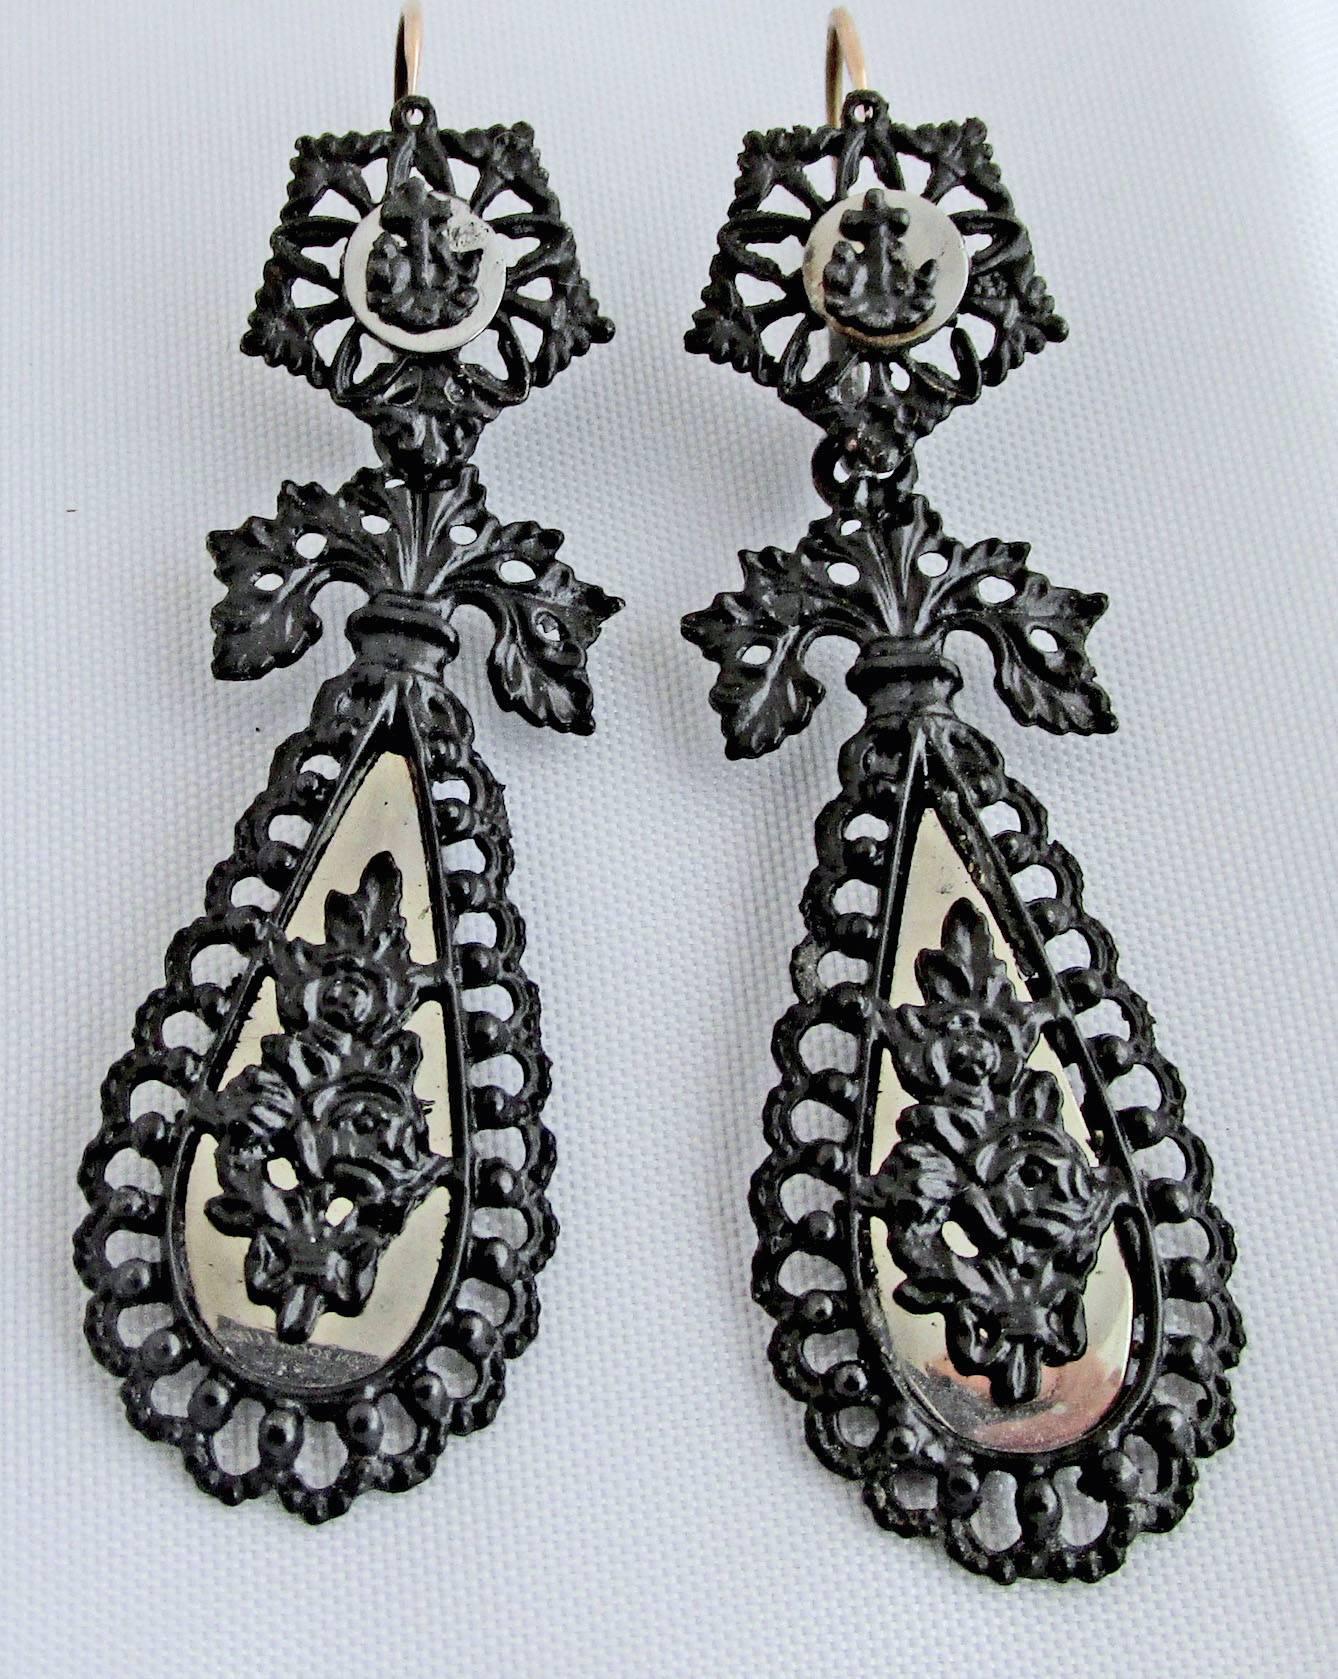 Stunning early 19th Century Berlin Iron earrings with a floral motif which is highlighted with polished steel. Berlin Iron was sought after by Napoleon who invaded German and captured the factory, confiscated the molds and took them back to France